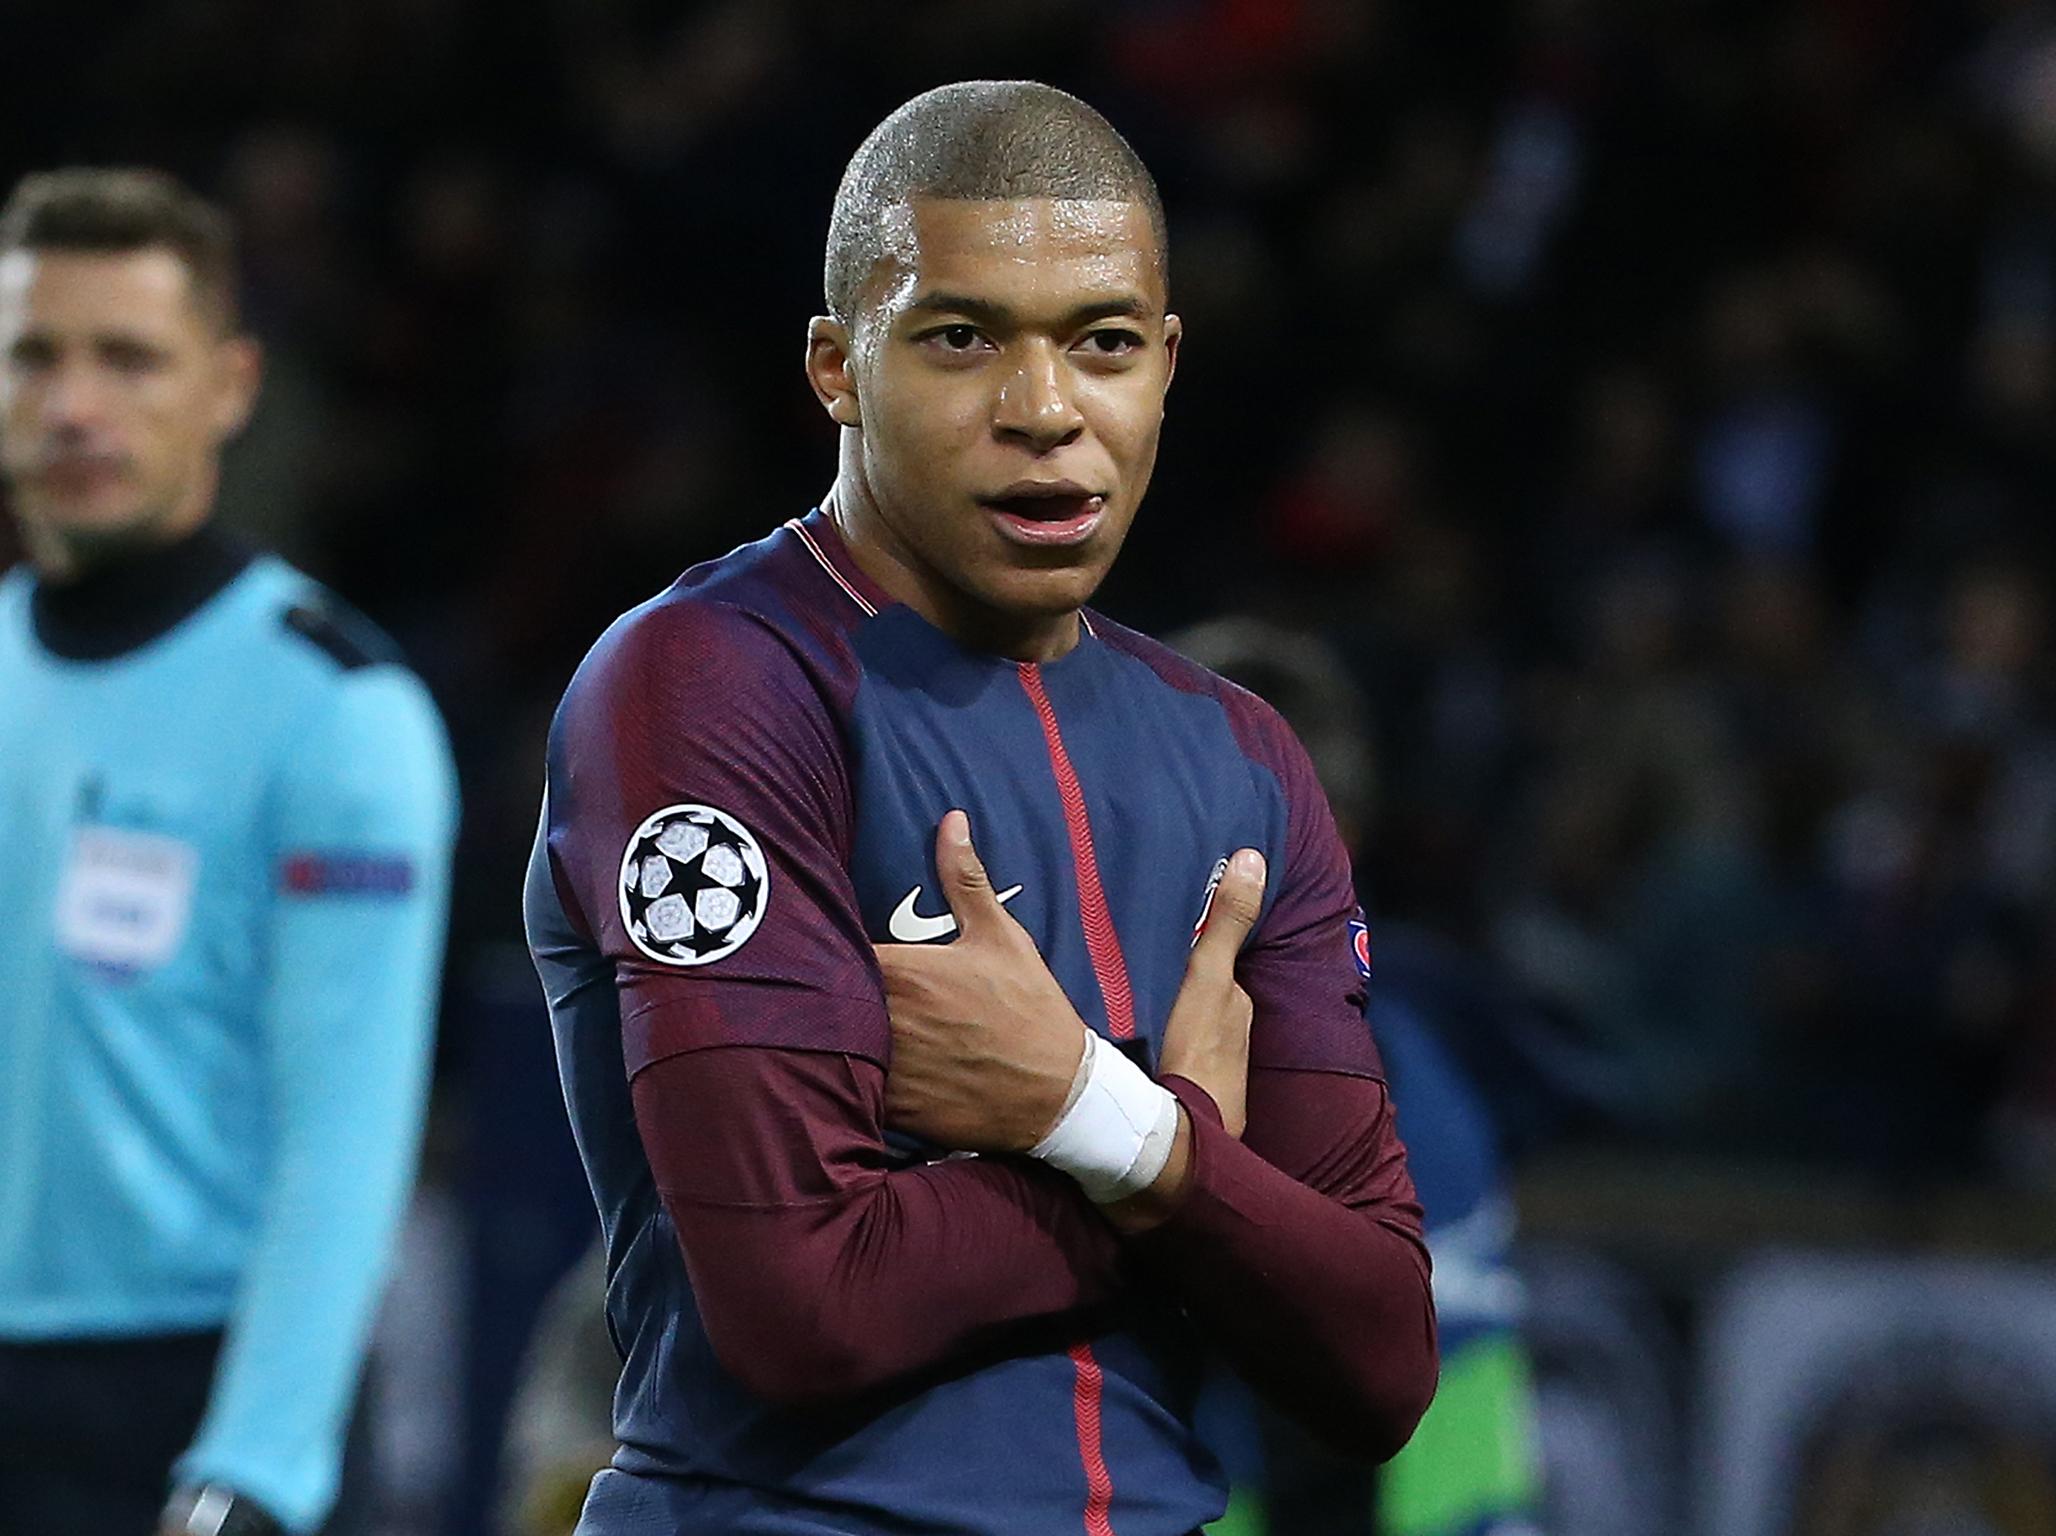 Kylian Mbappe reveals how close he came to joining Real Madrid instead of PSG in the summer 